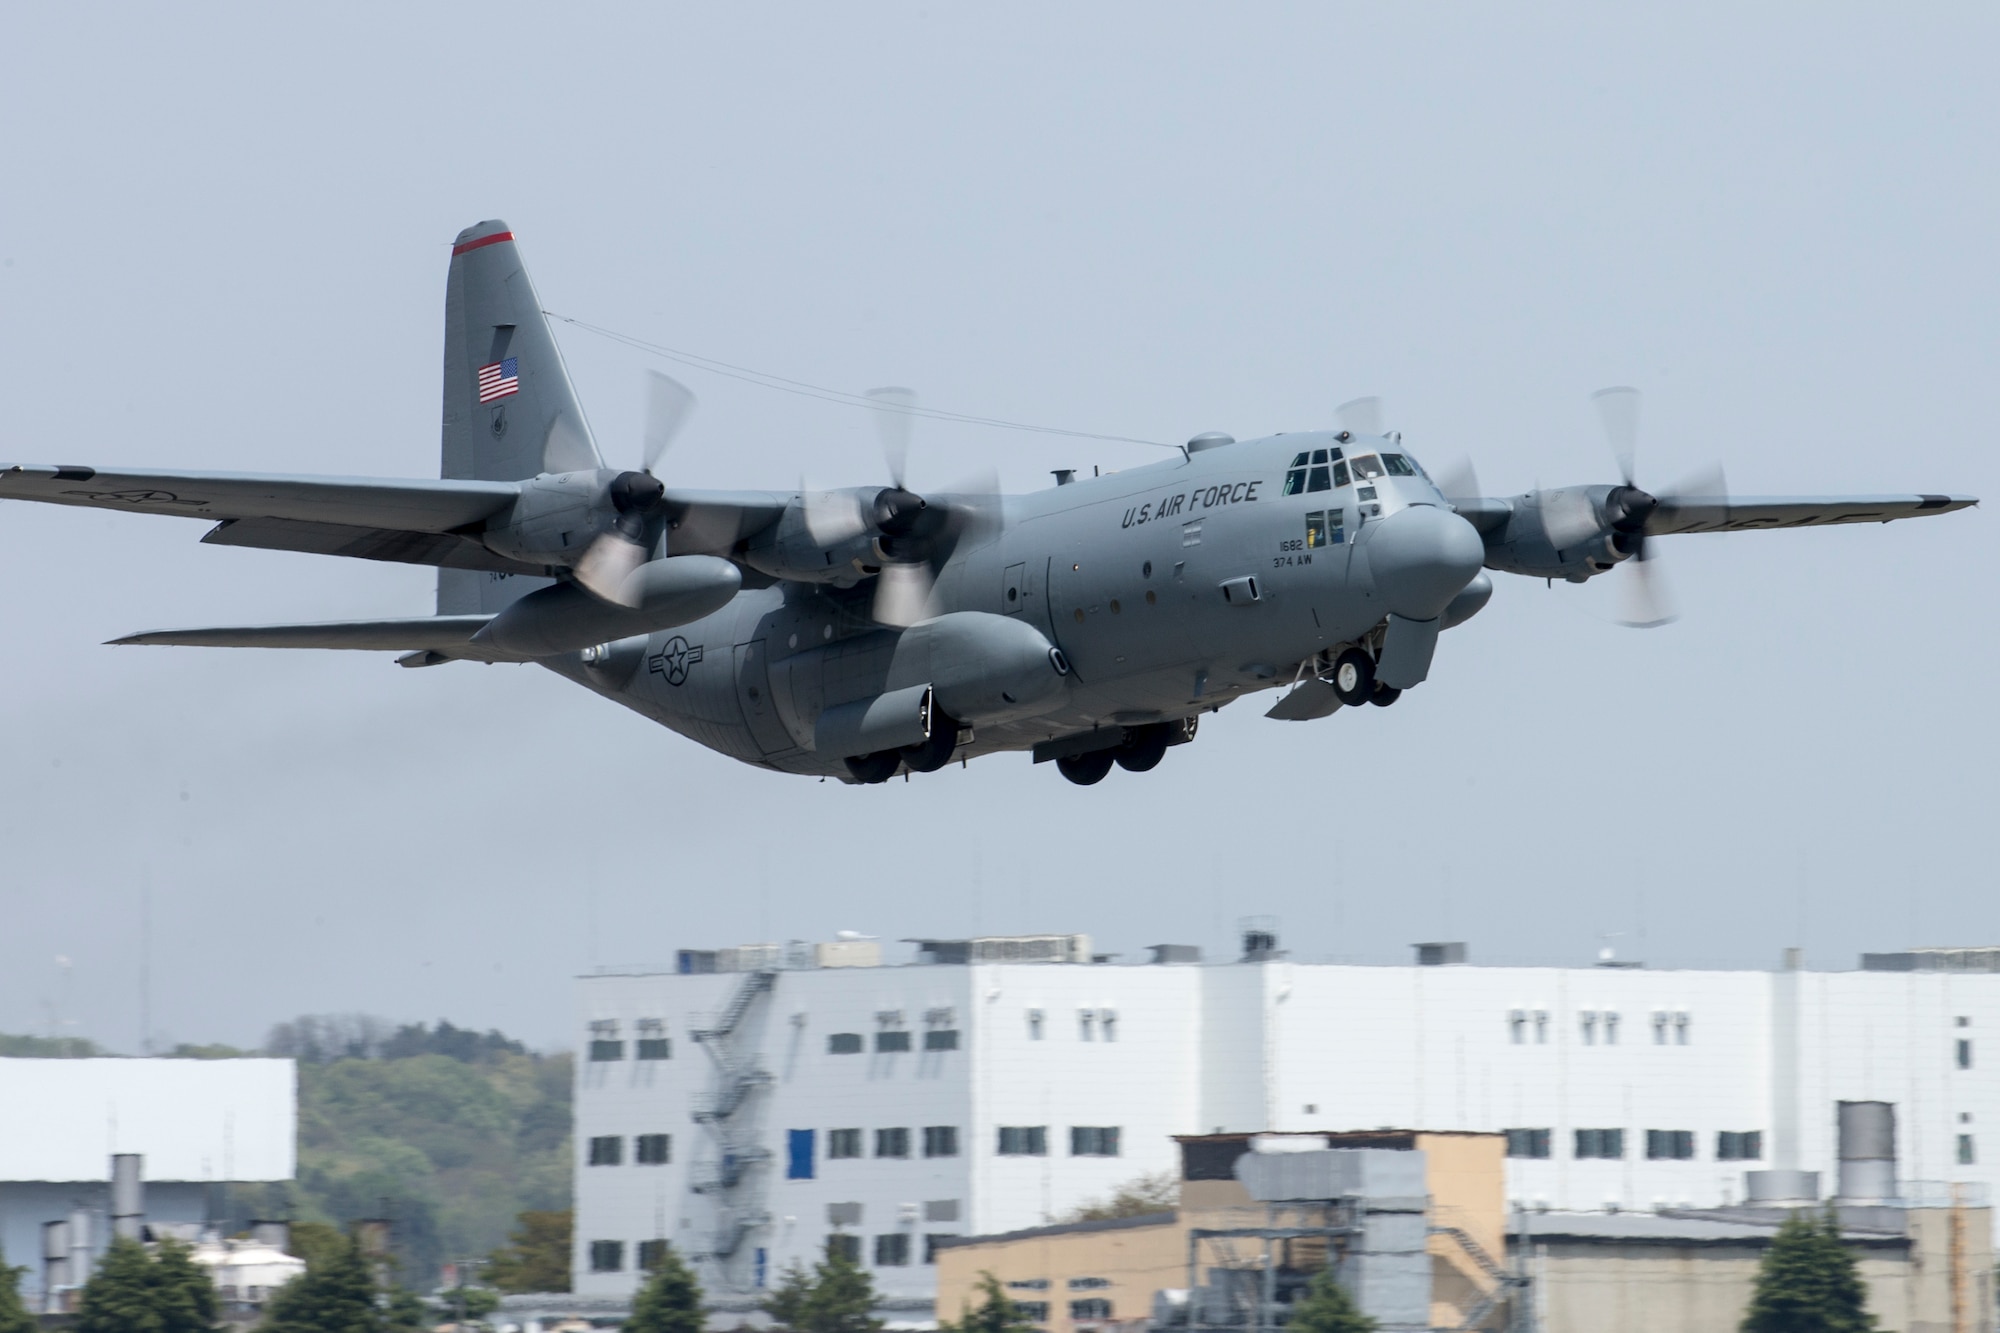 A C-130 Hercules takes off from Yokota Air Base, Japan, April 18, 2016. The 374th Airlift Wing sent two aircraft in support of the Government of Japan in their relief efforts for the series of earthquakes that took place in the Kyushu region recently. The aircraft transported heavy vehicles and personnel from Chitose Air Base, Hokkaido to Kyushu. (U.S. Air Force photo by Yasuo Osakabe/Released)